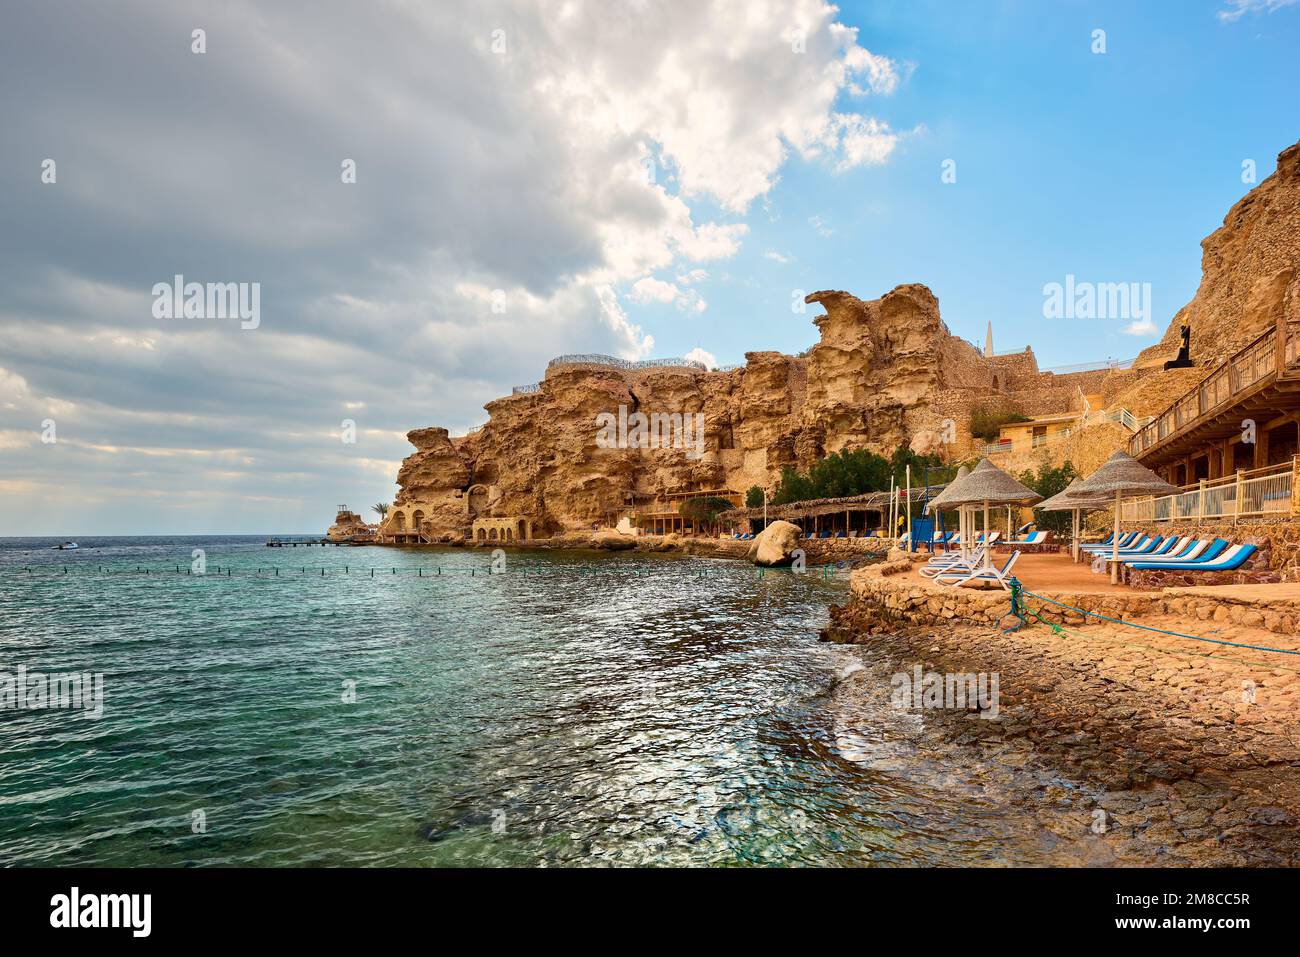 A beach at mid-day with mountain at the horizon - Sharm el-Sheikh, Egypt Stock Photo